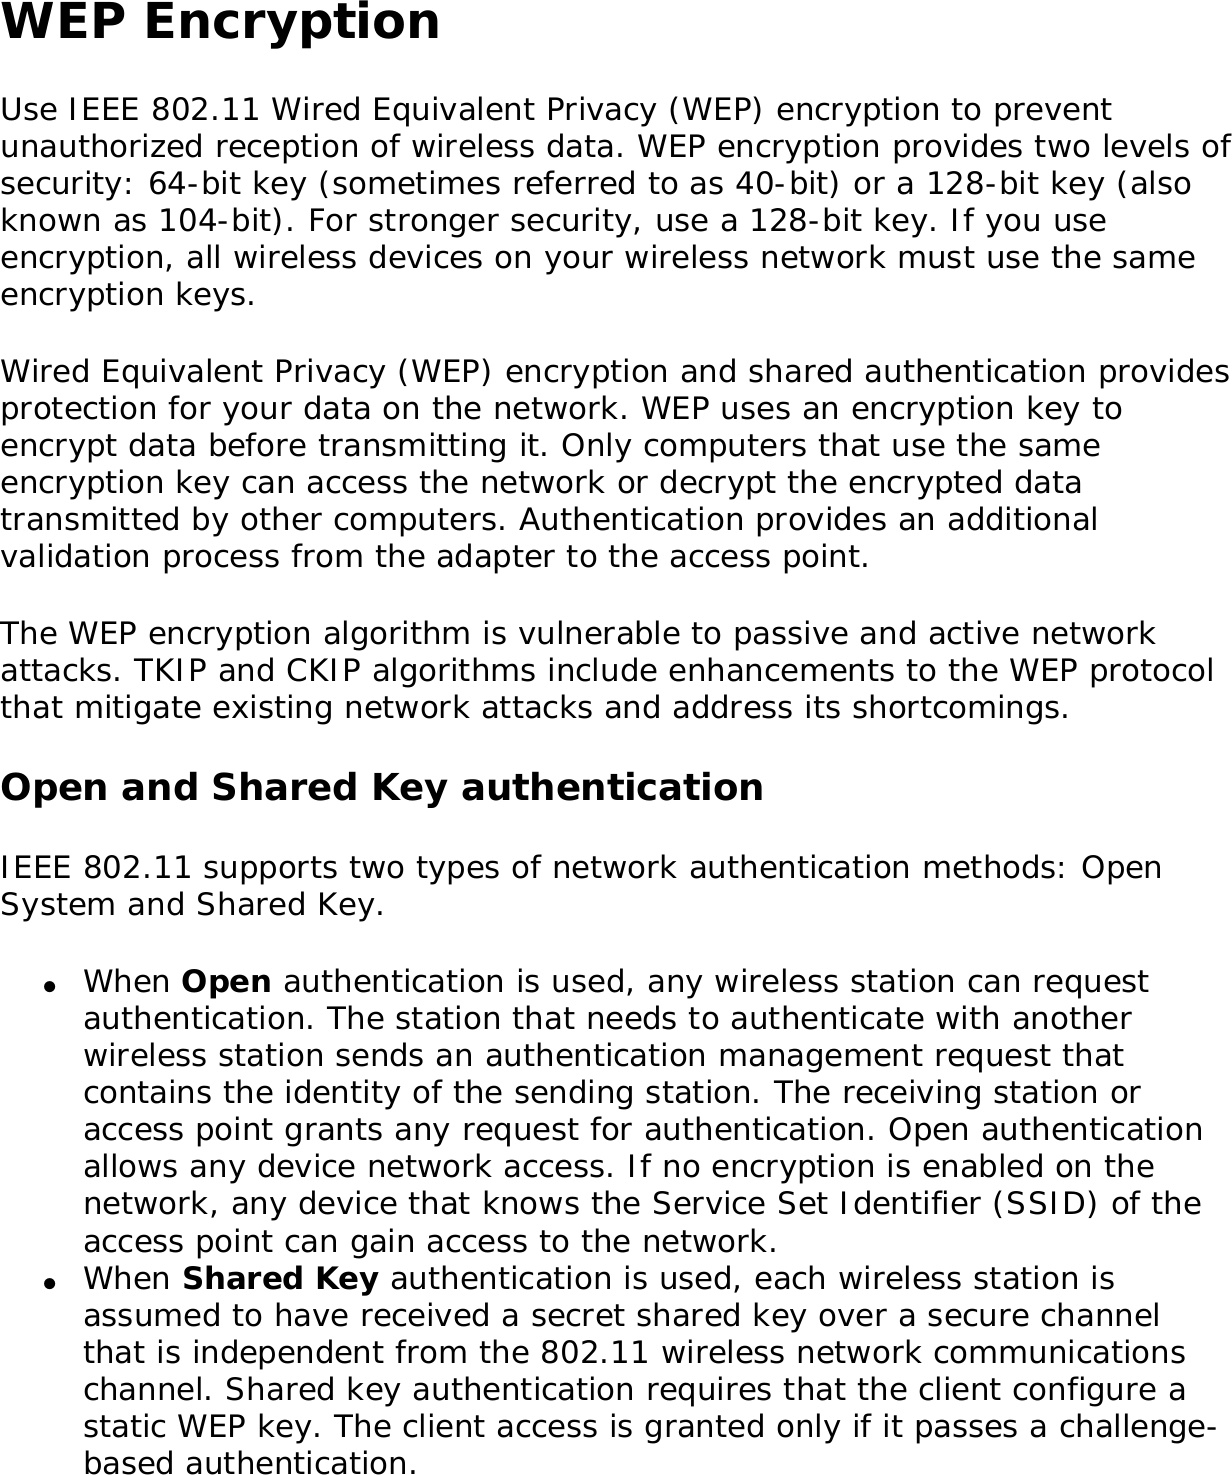 WEP EncryptionUse IEEE 802.11 Wired Equivalent Privacy (WEP) encryption to prevent unauthorized reception of wireless data. WEP encryption provides two levels of security: 64-bit key (sometimes referred to as 40-bit) or a 128-bit key (also known as 104-bit). For stronger security, use a 128-bit key. If you use encryption, all wireless devices on your wireless network must use the same encryption keys. Wired Equivalent Privacy (WEP) encryption and shared authentication provides protection for your data on the network. WEP uses an encryption key to encrypt data before transmitting it. Only computers that use the same encryption key can access the network or decrypt the encrypted data transmitted by other computers. Authentication provides an additional validation process from the adapter to the access point. The WEP encryption algorithm is vulnerable to passive and active network attacks. TKIP and CKIP algorithms include enhancements to the WEP protocol that mitigate existing network attacks and address its shortcomings. Open and Shared Key authenticationIEEE 802.11 supports two types of network authentication methods: Open System and Shared Key. ●     When Open authentication is used, any wireless station can request authentication. The station that needs to authenticate with another wireless station sends an authentication management request that contains the identity of the sending station. The receiving station or access point grants any request for authentication. Open authentication allows any device network access. If no encryption is enabled on the network, any device that knows the Service Set Identifier (SSID) of the access point can gain access to the network. ●     When Shared Key authentication is used, each wireless station is assumed to have received a secret shared key over a secure channel that is independent from the 802.11 wireless network communications channel. Shared key authentication requires that the client configure a static WEP key. The client access is granted only if it passes a challenge-based authentication.